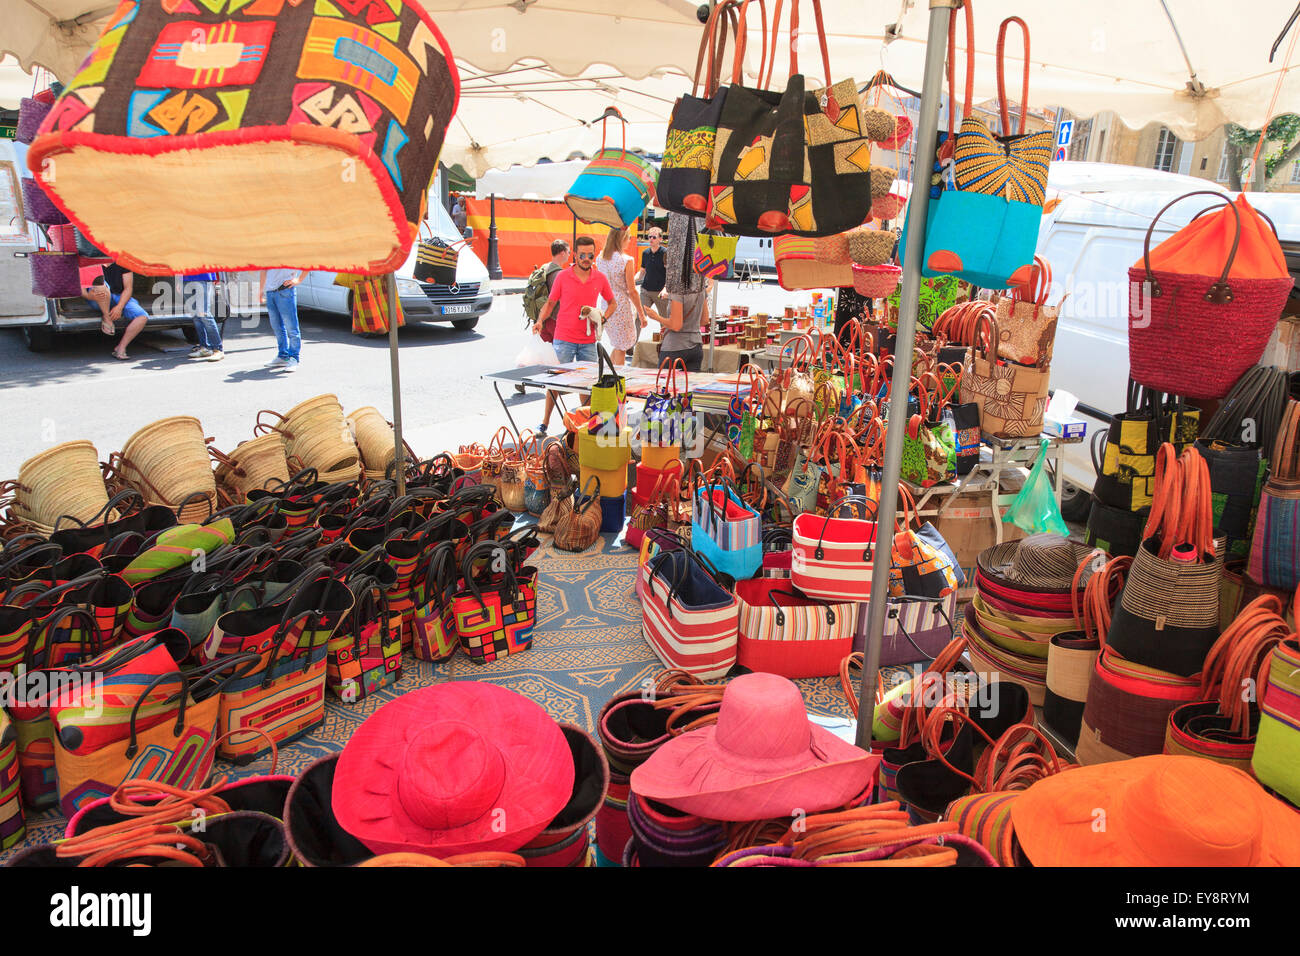 Shopping bags on display on a French market stall Stock Photo